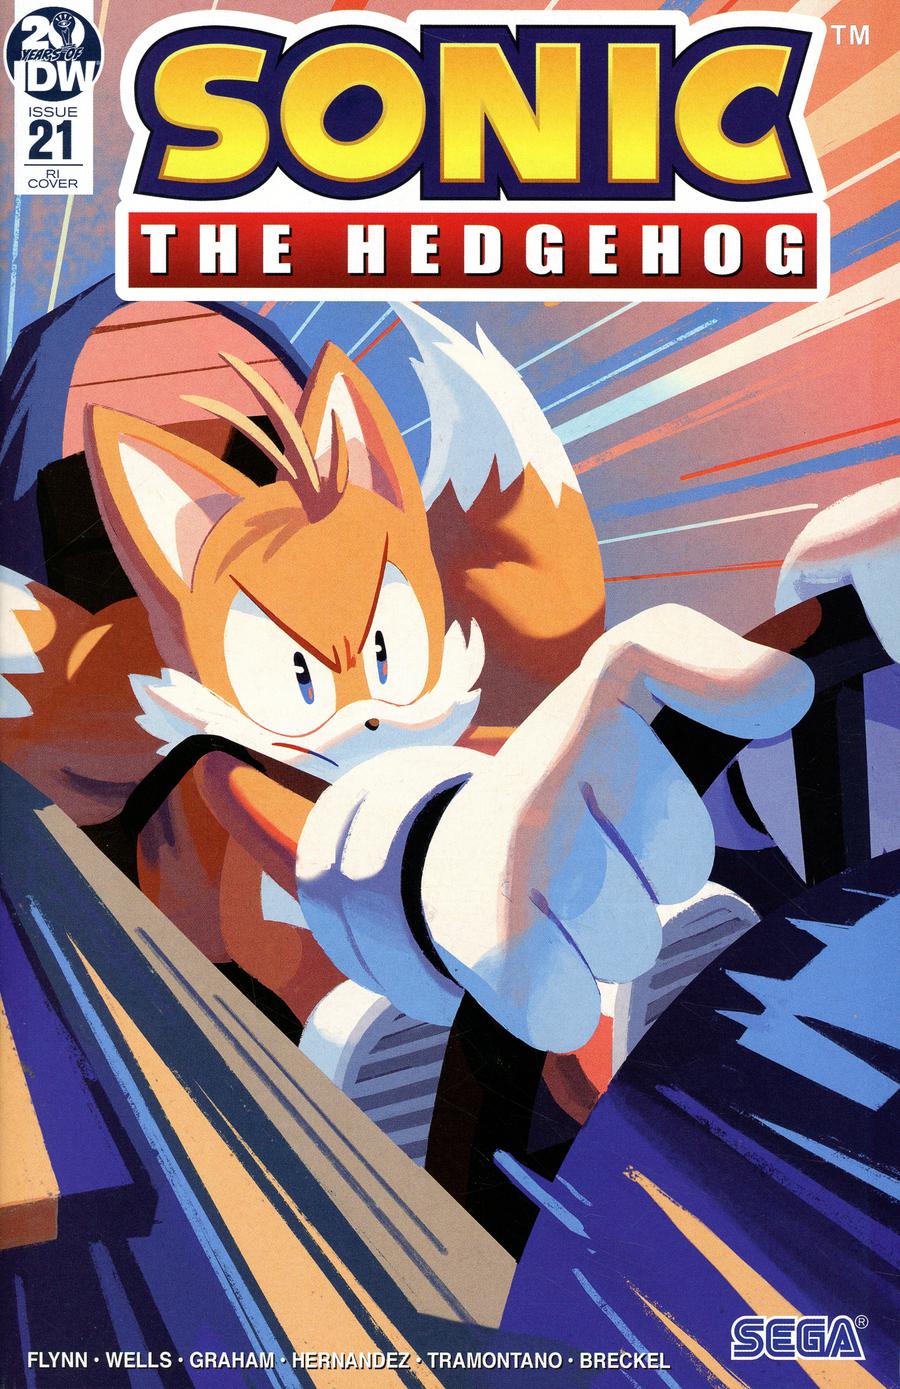 Sonic The Hedgehog Vol 3 #21 Cover C Incentive Nathalie Fourdraine Variant Cover